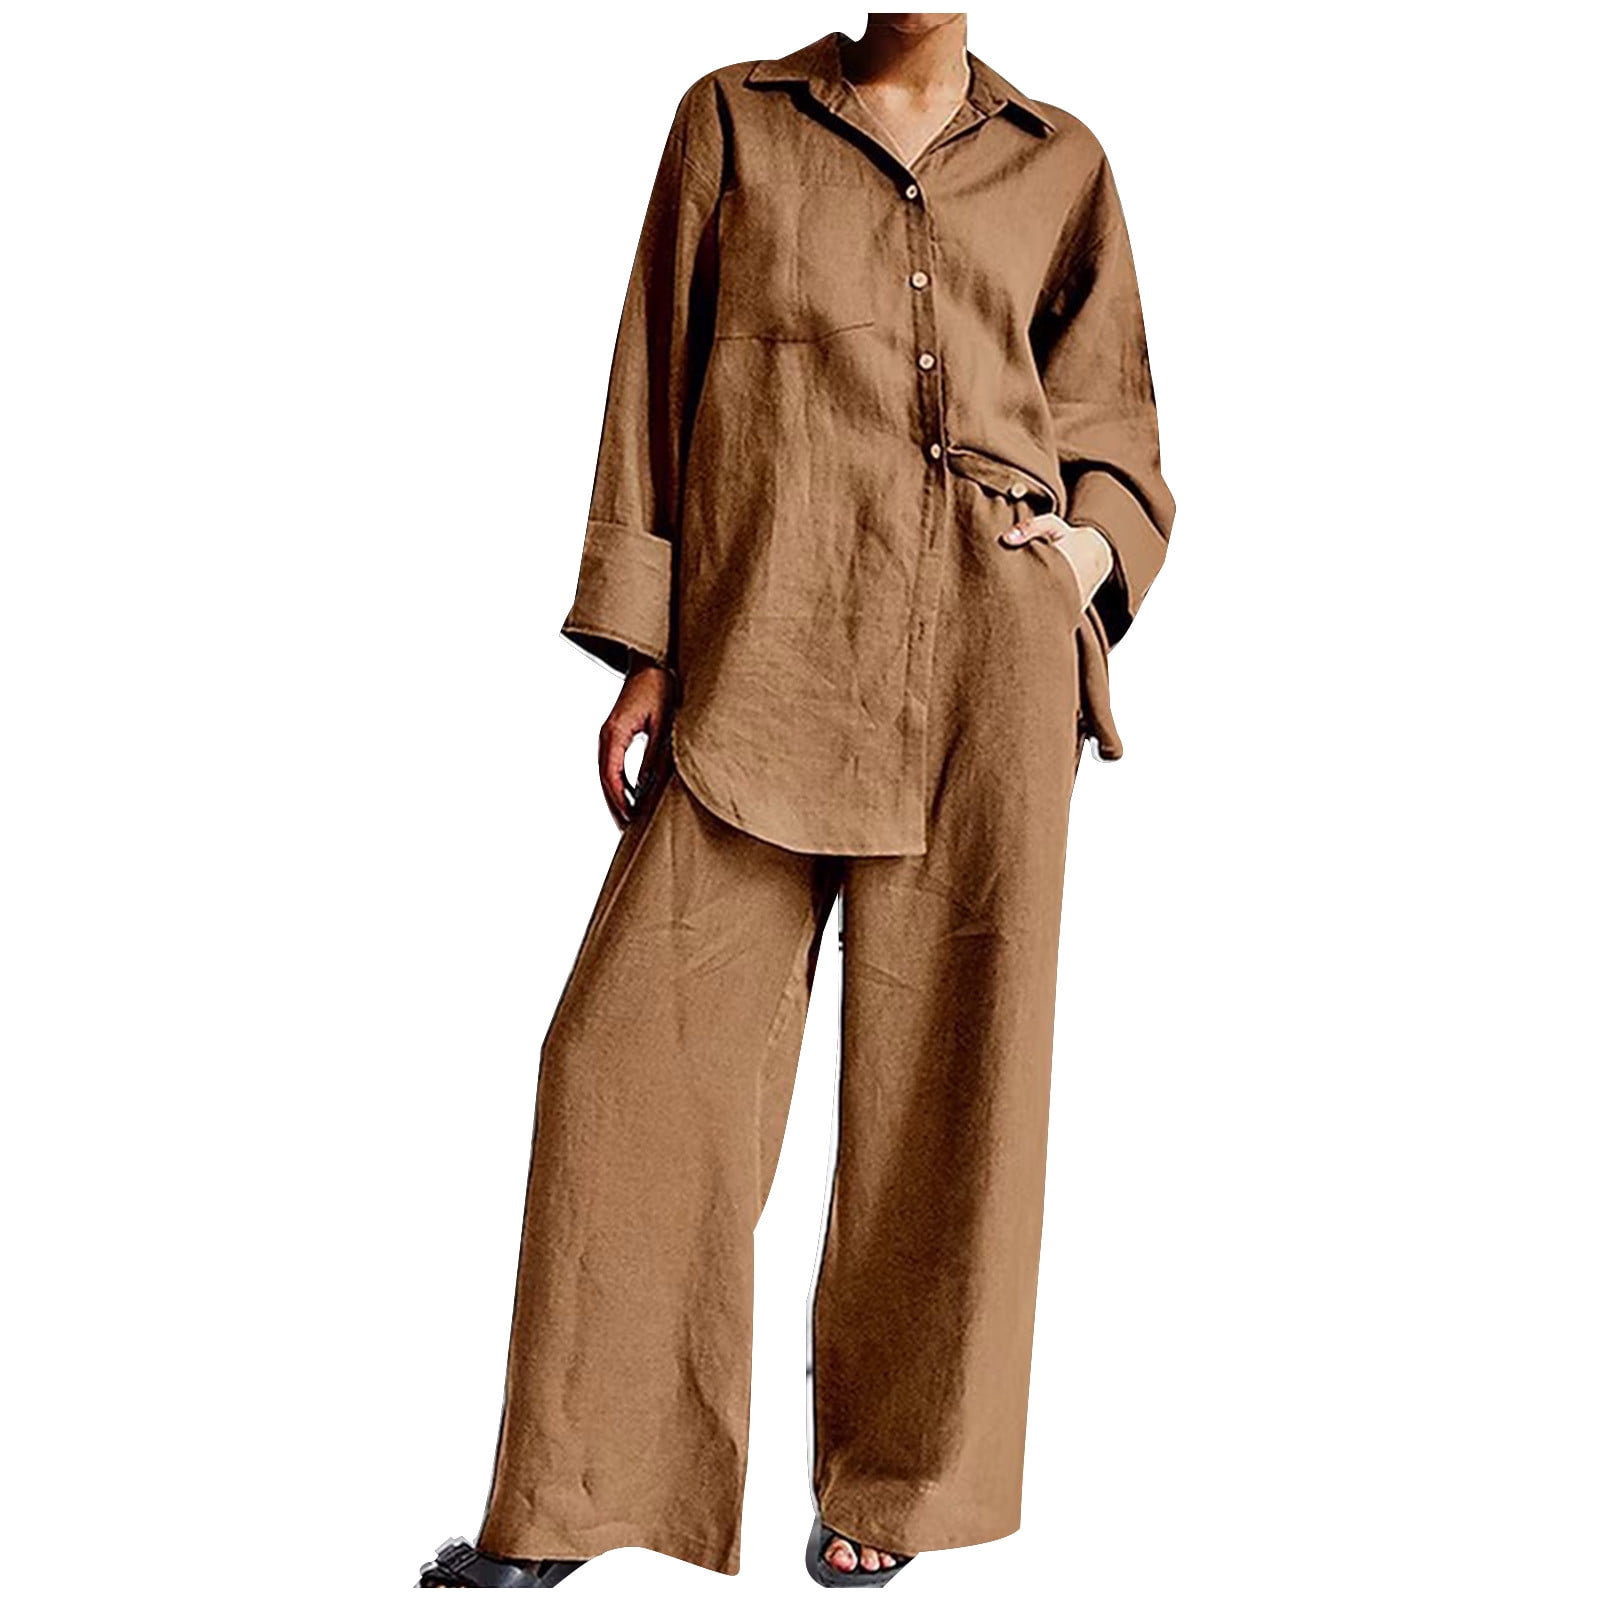 Women's 2 Piece Outfit Button Down Tops With Pocket and Long Wide Leg Pants  Set Casual Comfy Plus Size Loungewear 